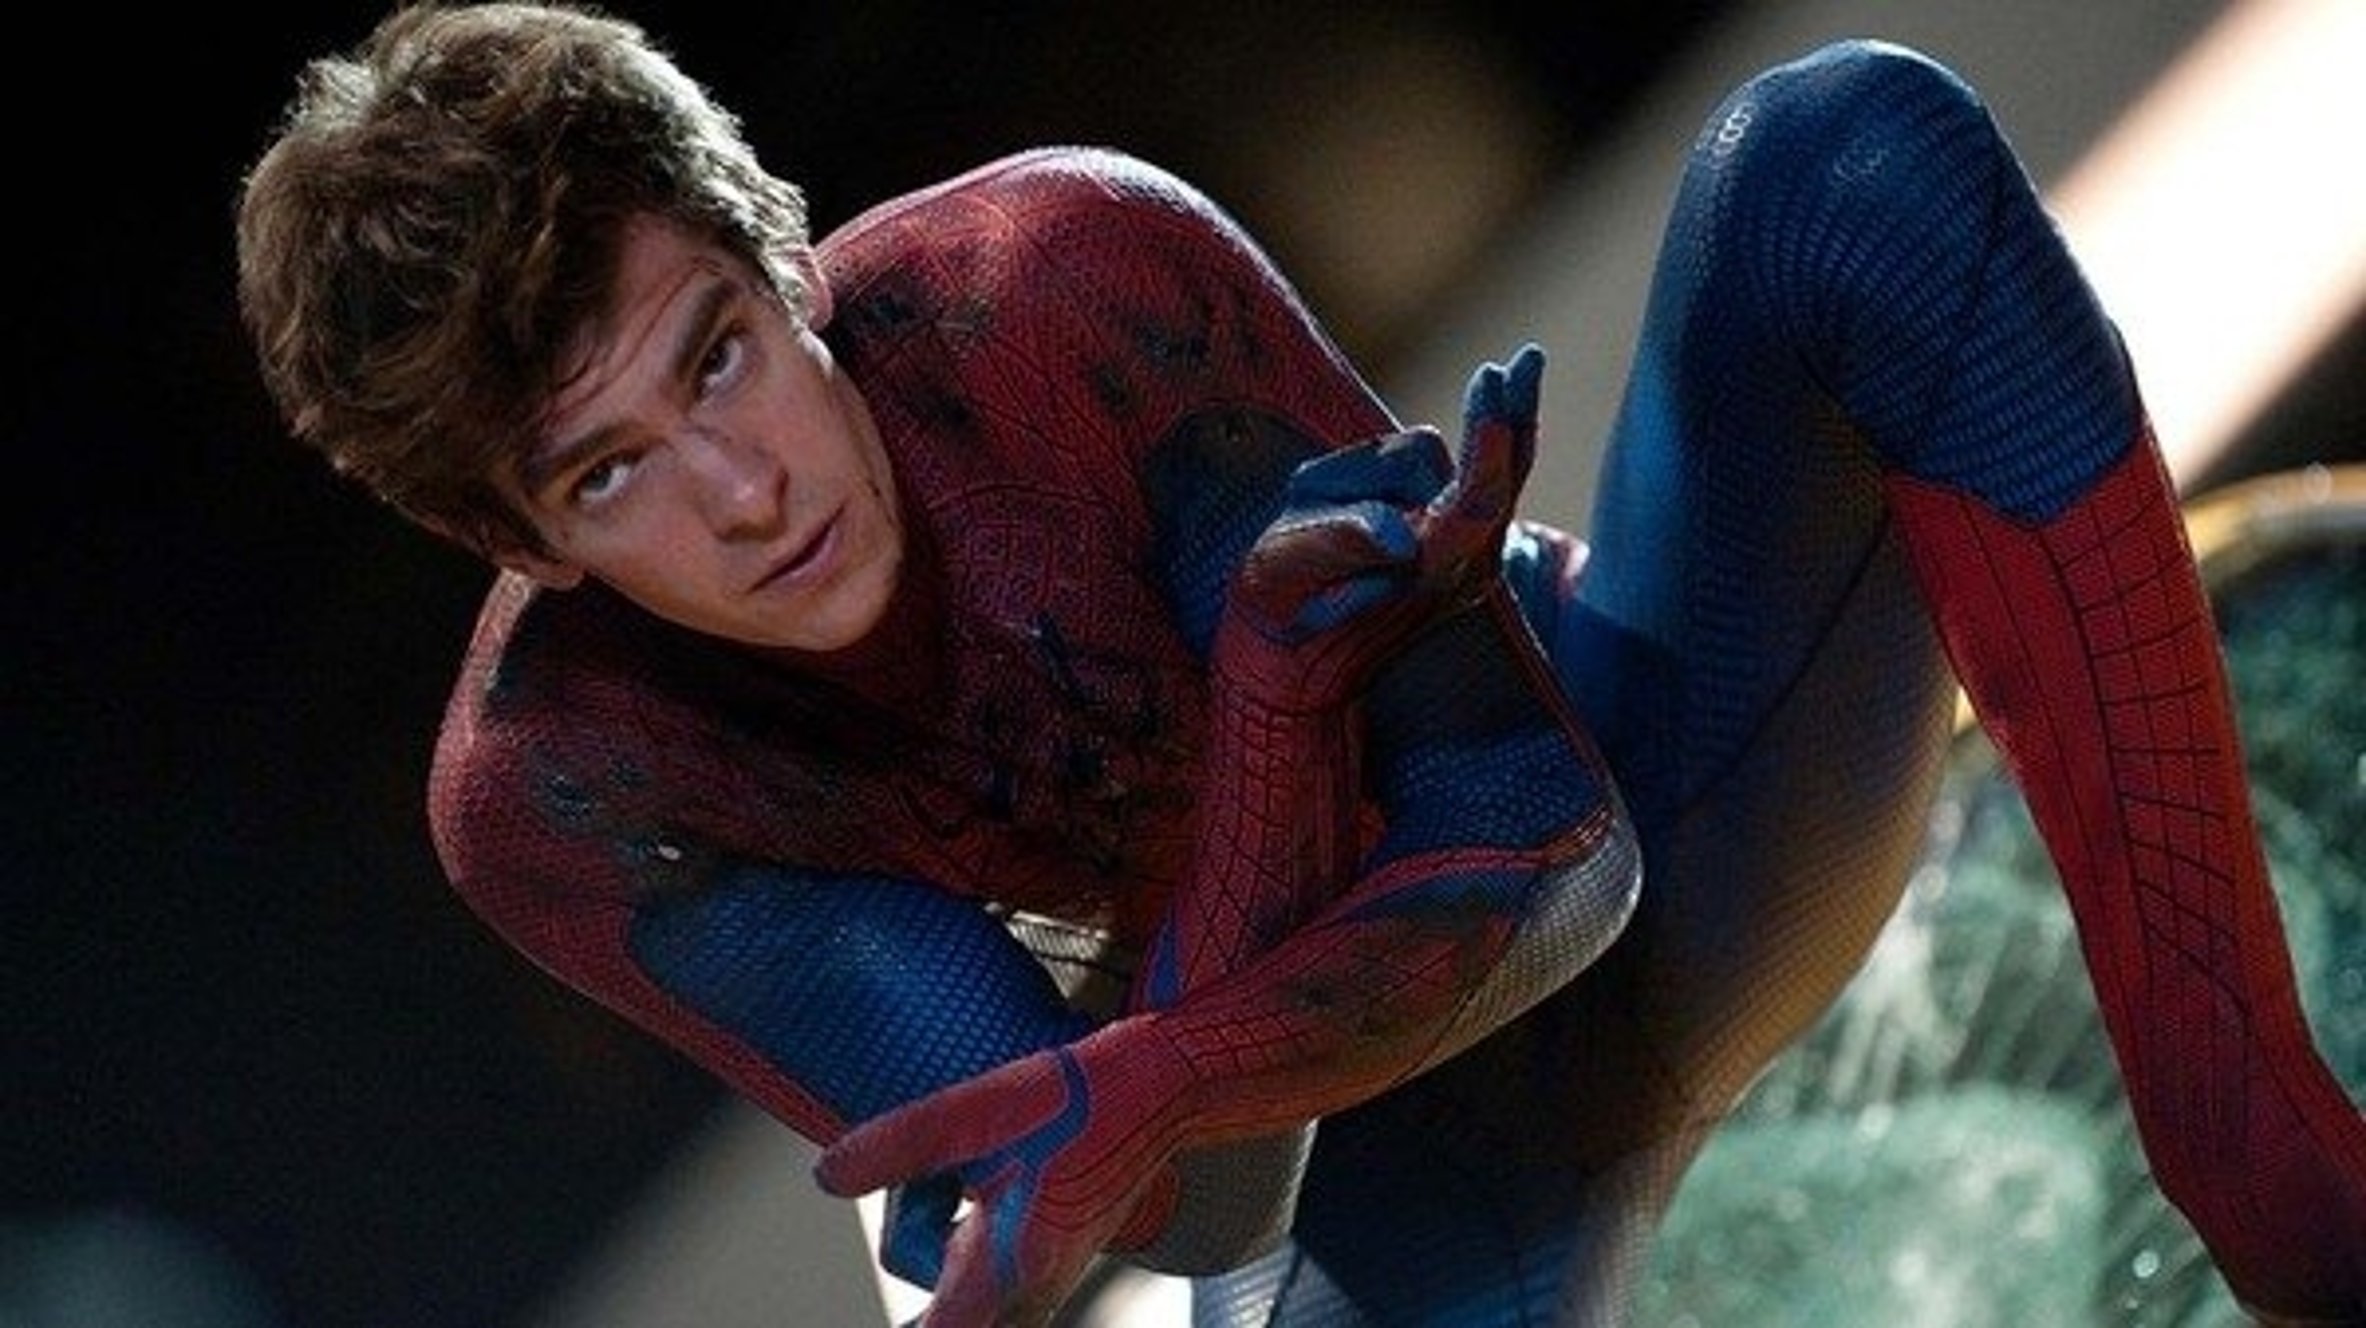 Andrew Garfield Has No Issues With The Many Spider-Man Movies Around